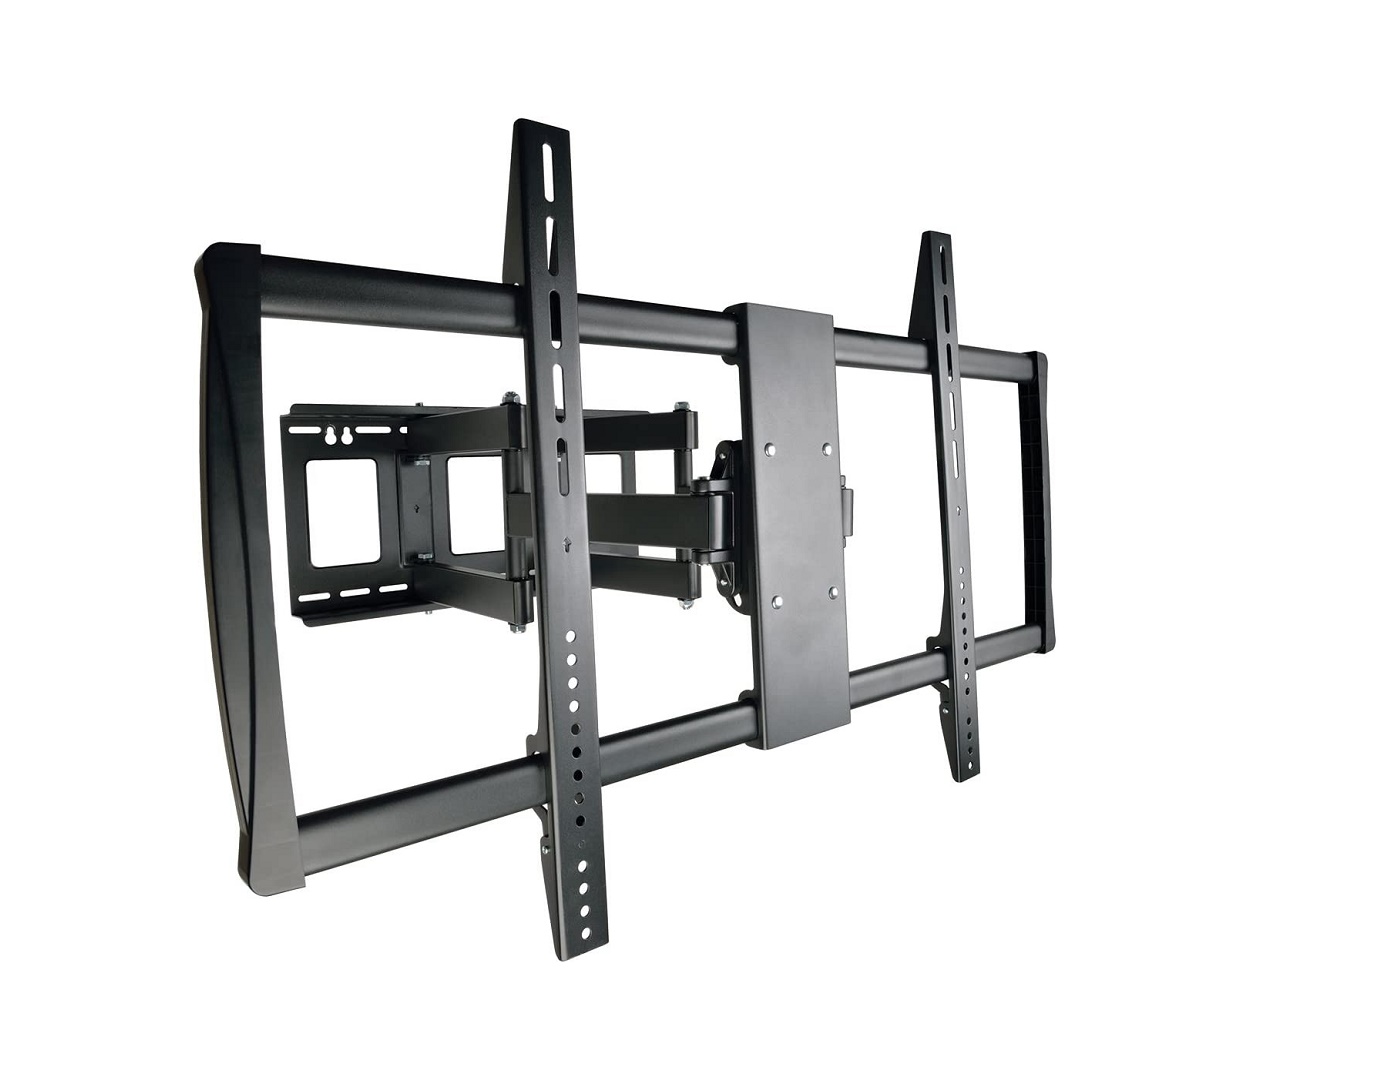 Tripp Lite Swivel/Tilt Wall Mount For 60 To 100 Tvs and Monitors Up To 275 LB DWM60100XX